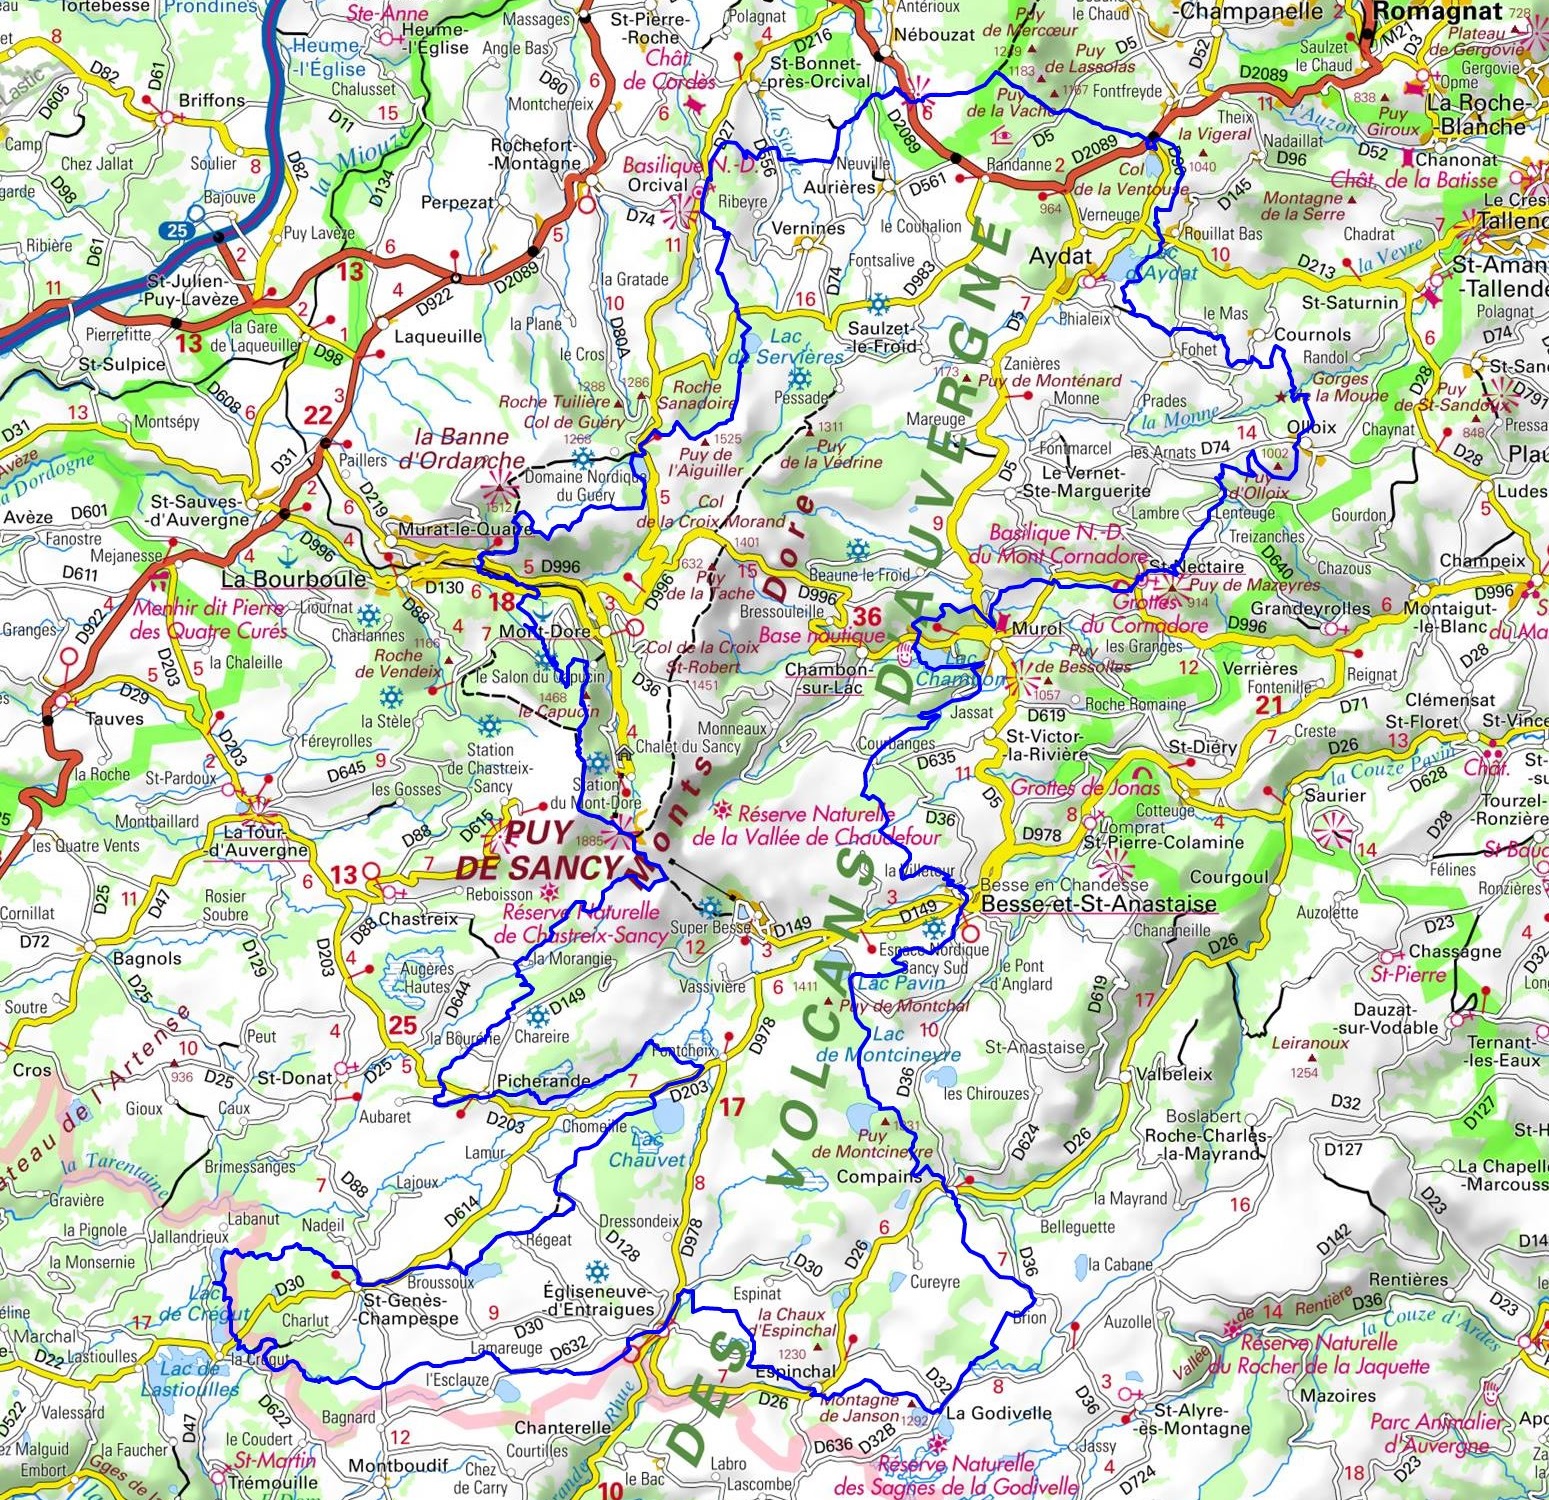 GR30 Around Auvergne volcanoes and lakes (Puy-de-Dome) 1